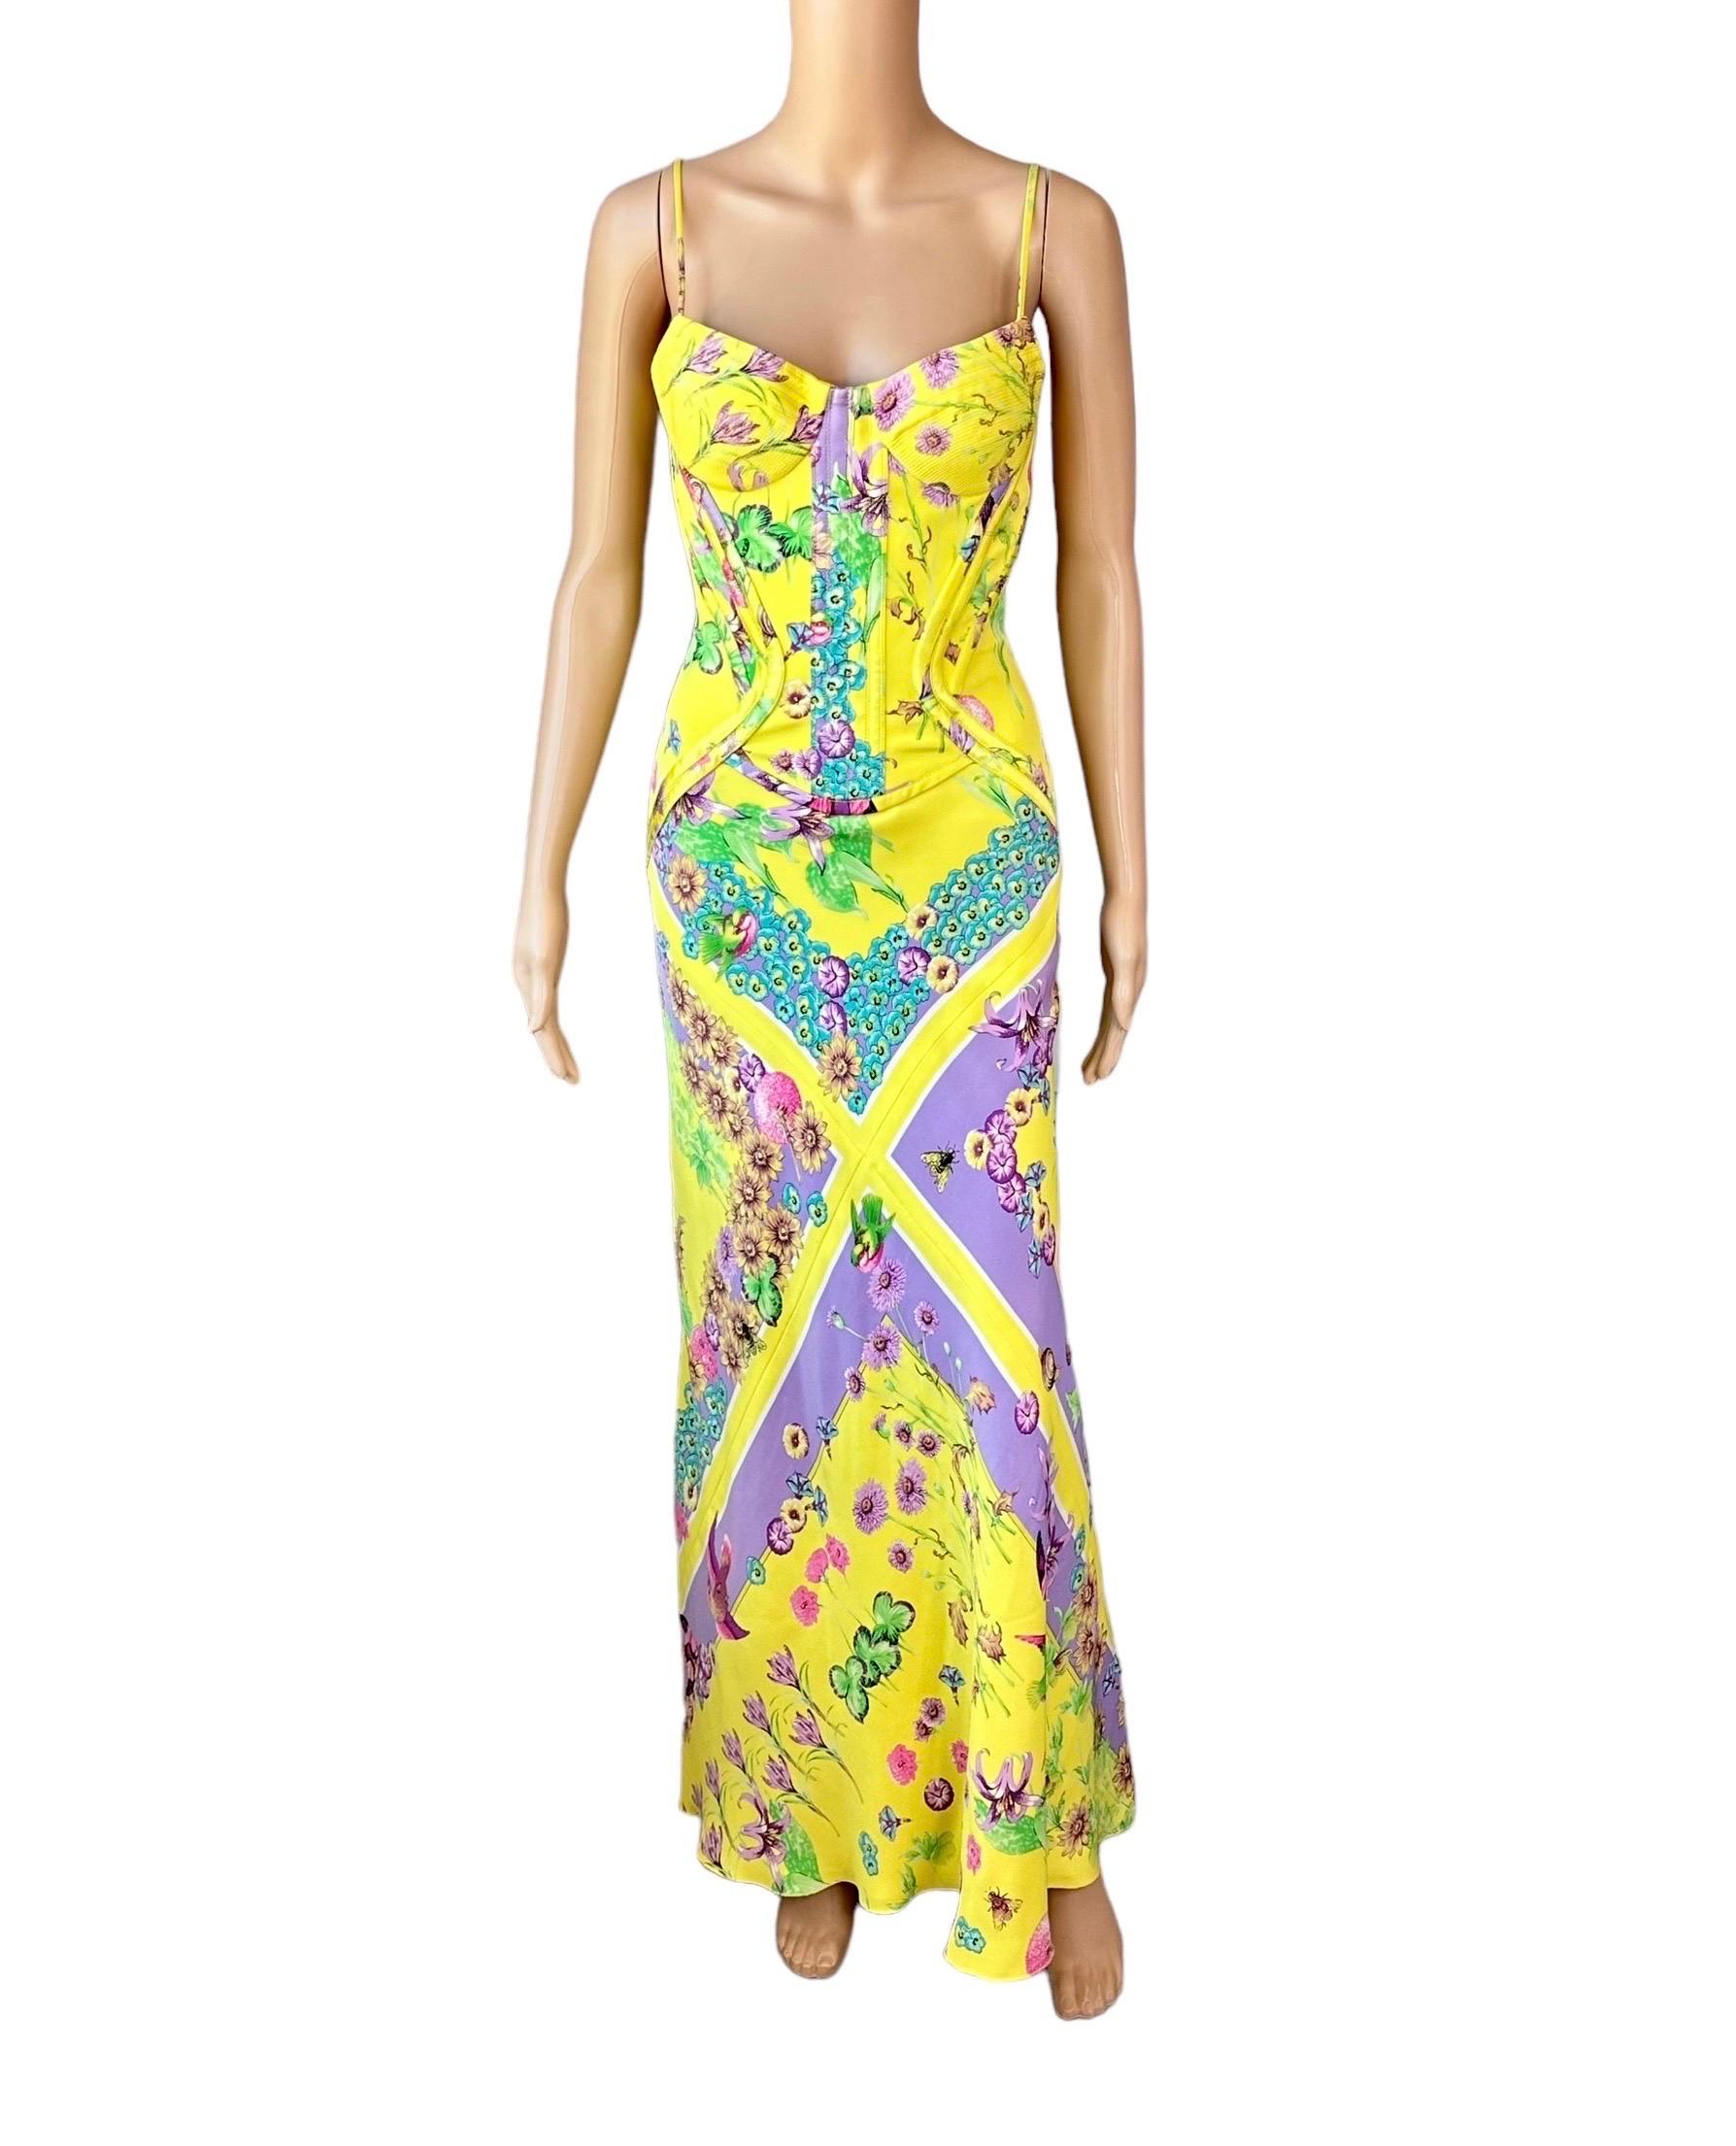 Versace S/S 2006 Bustier Corset Floral Print Evening Dress Gown In Excellent Condition For Sale In Naples, FL